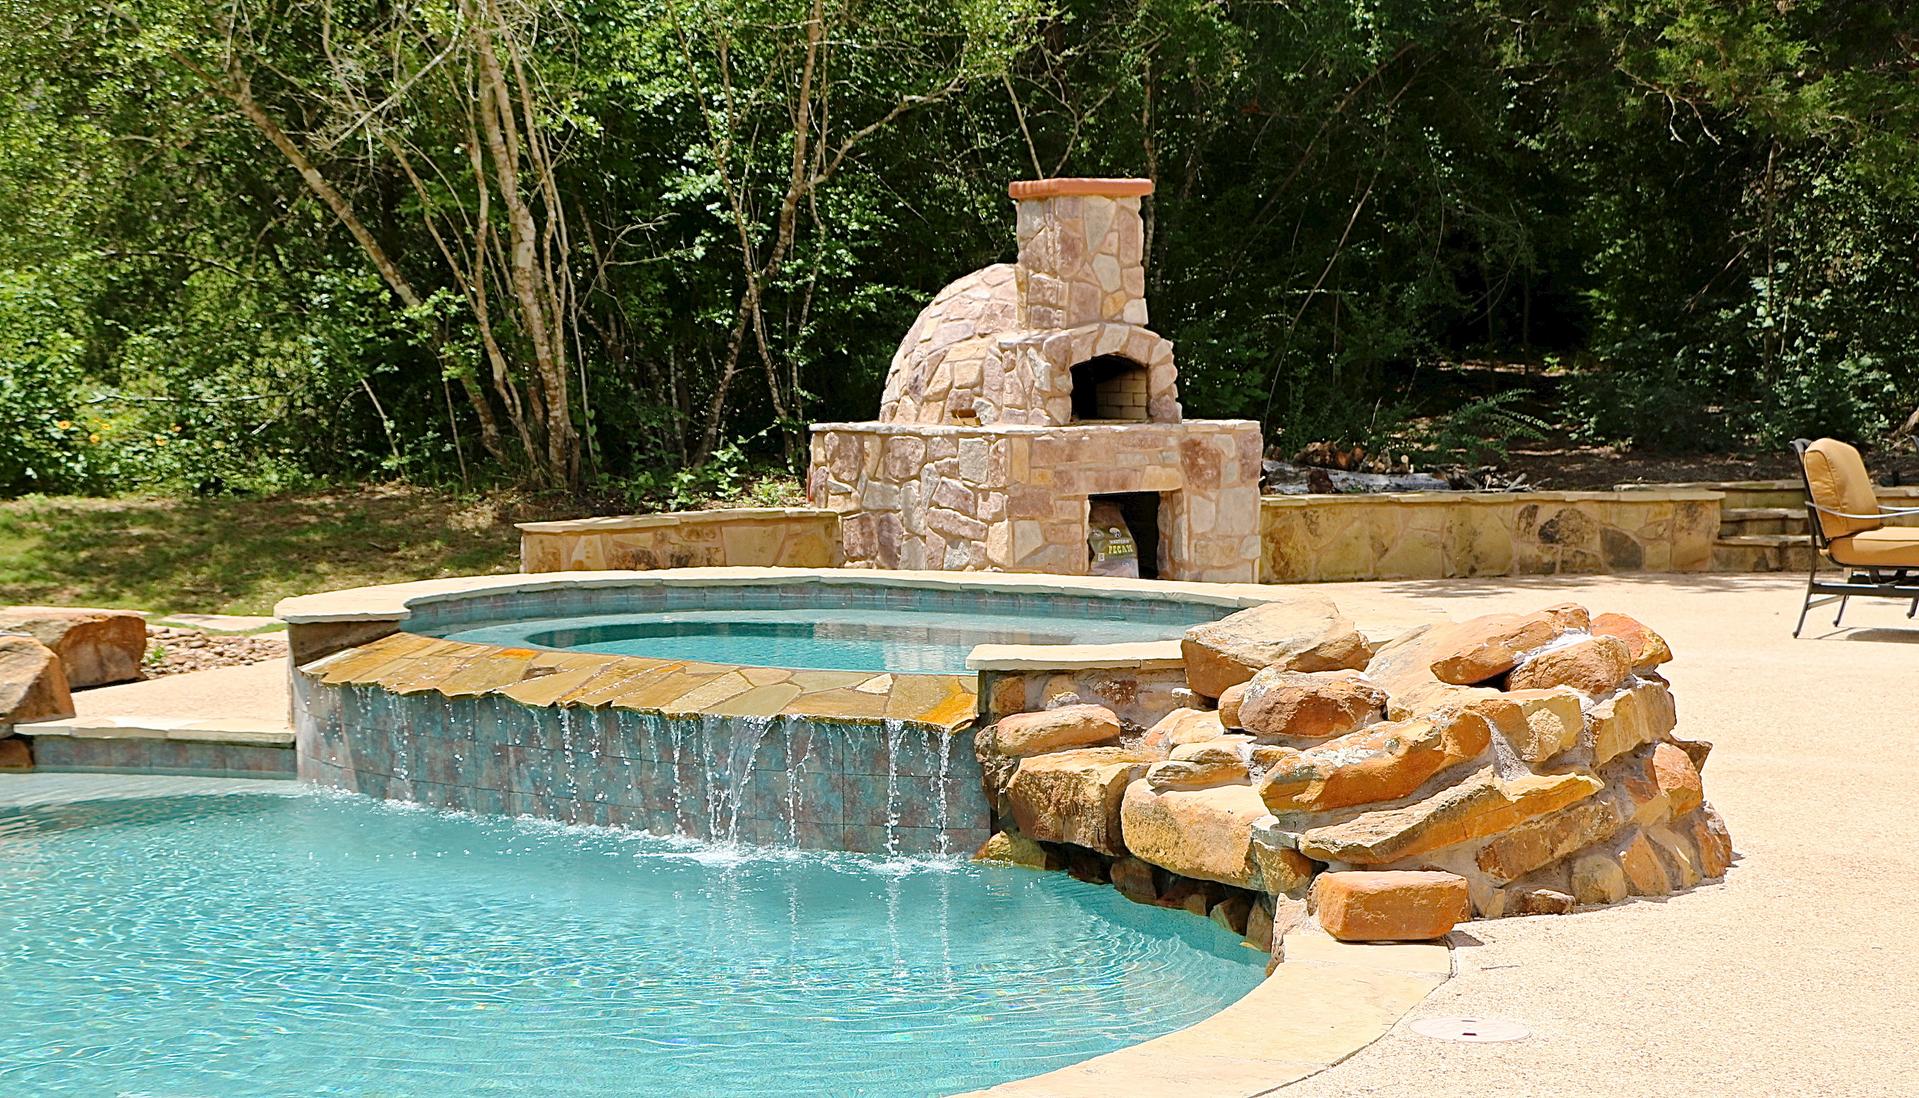 Poolside pizza oven.